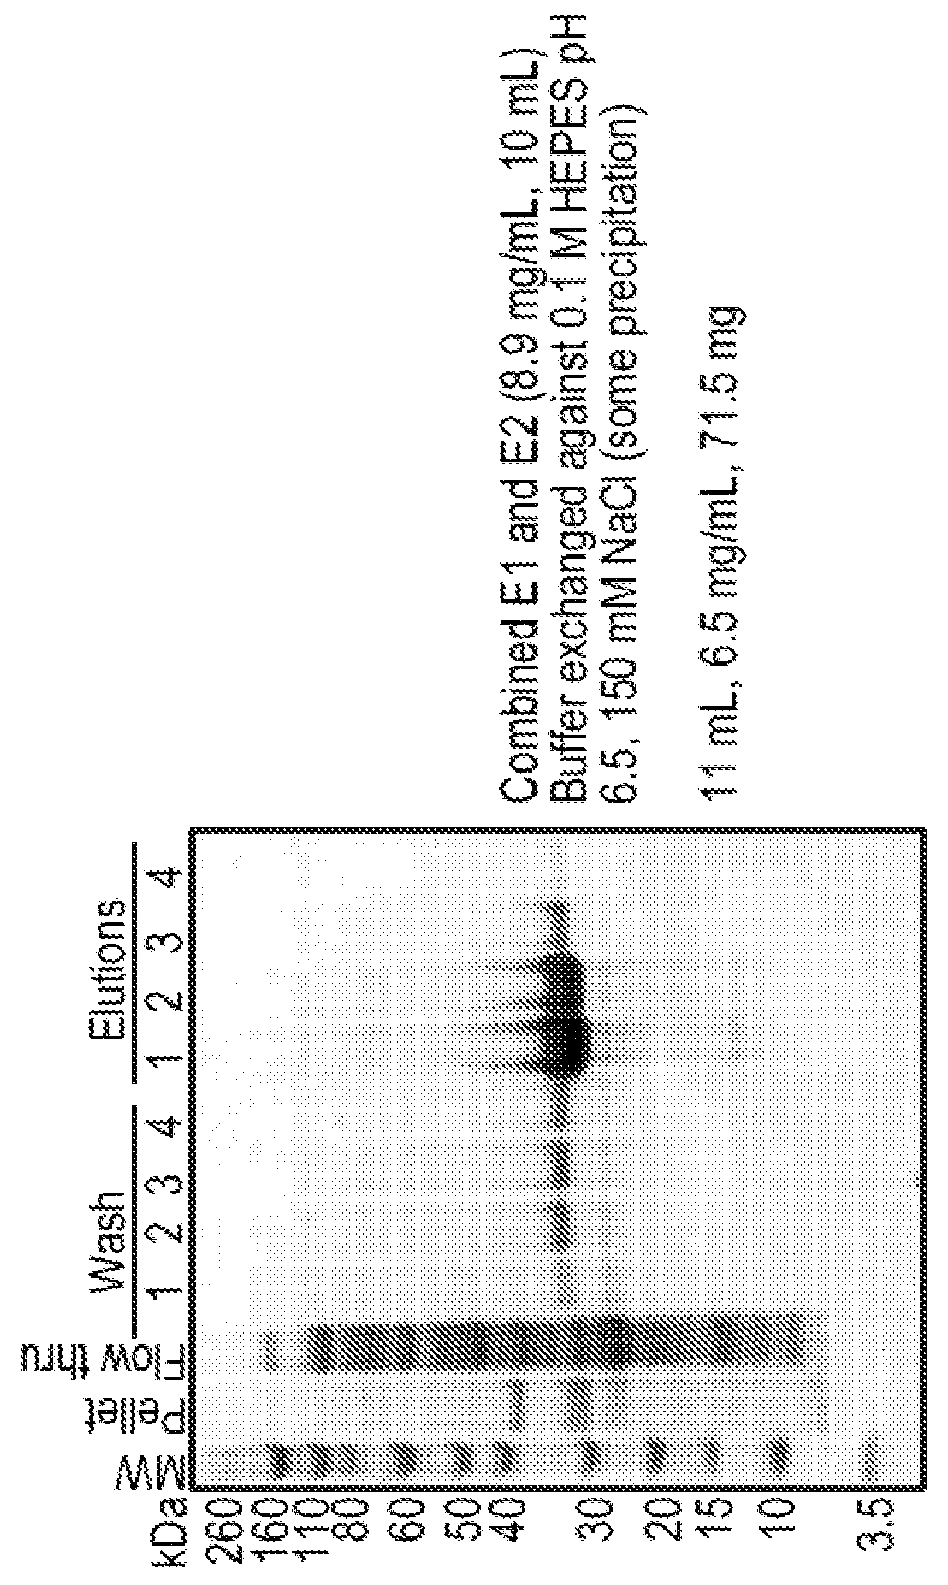 Charge-engineered antibodies or compositions of penetration-enhanced targeting proteins and methods of use